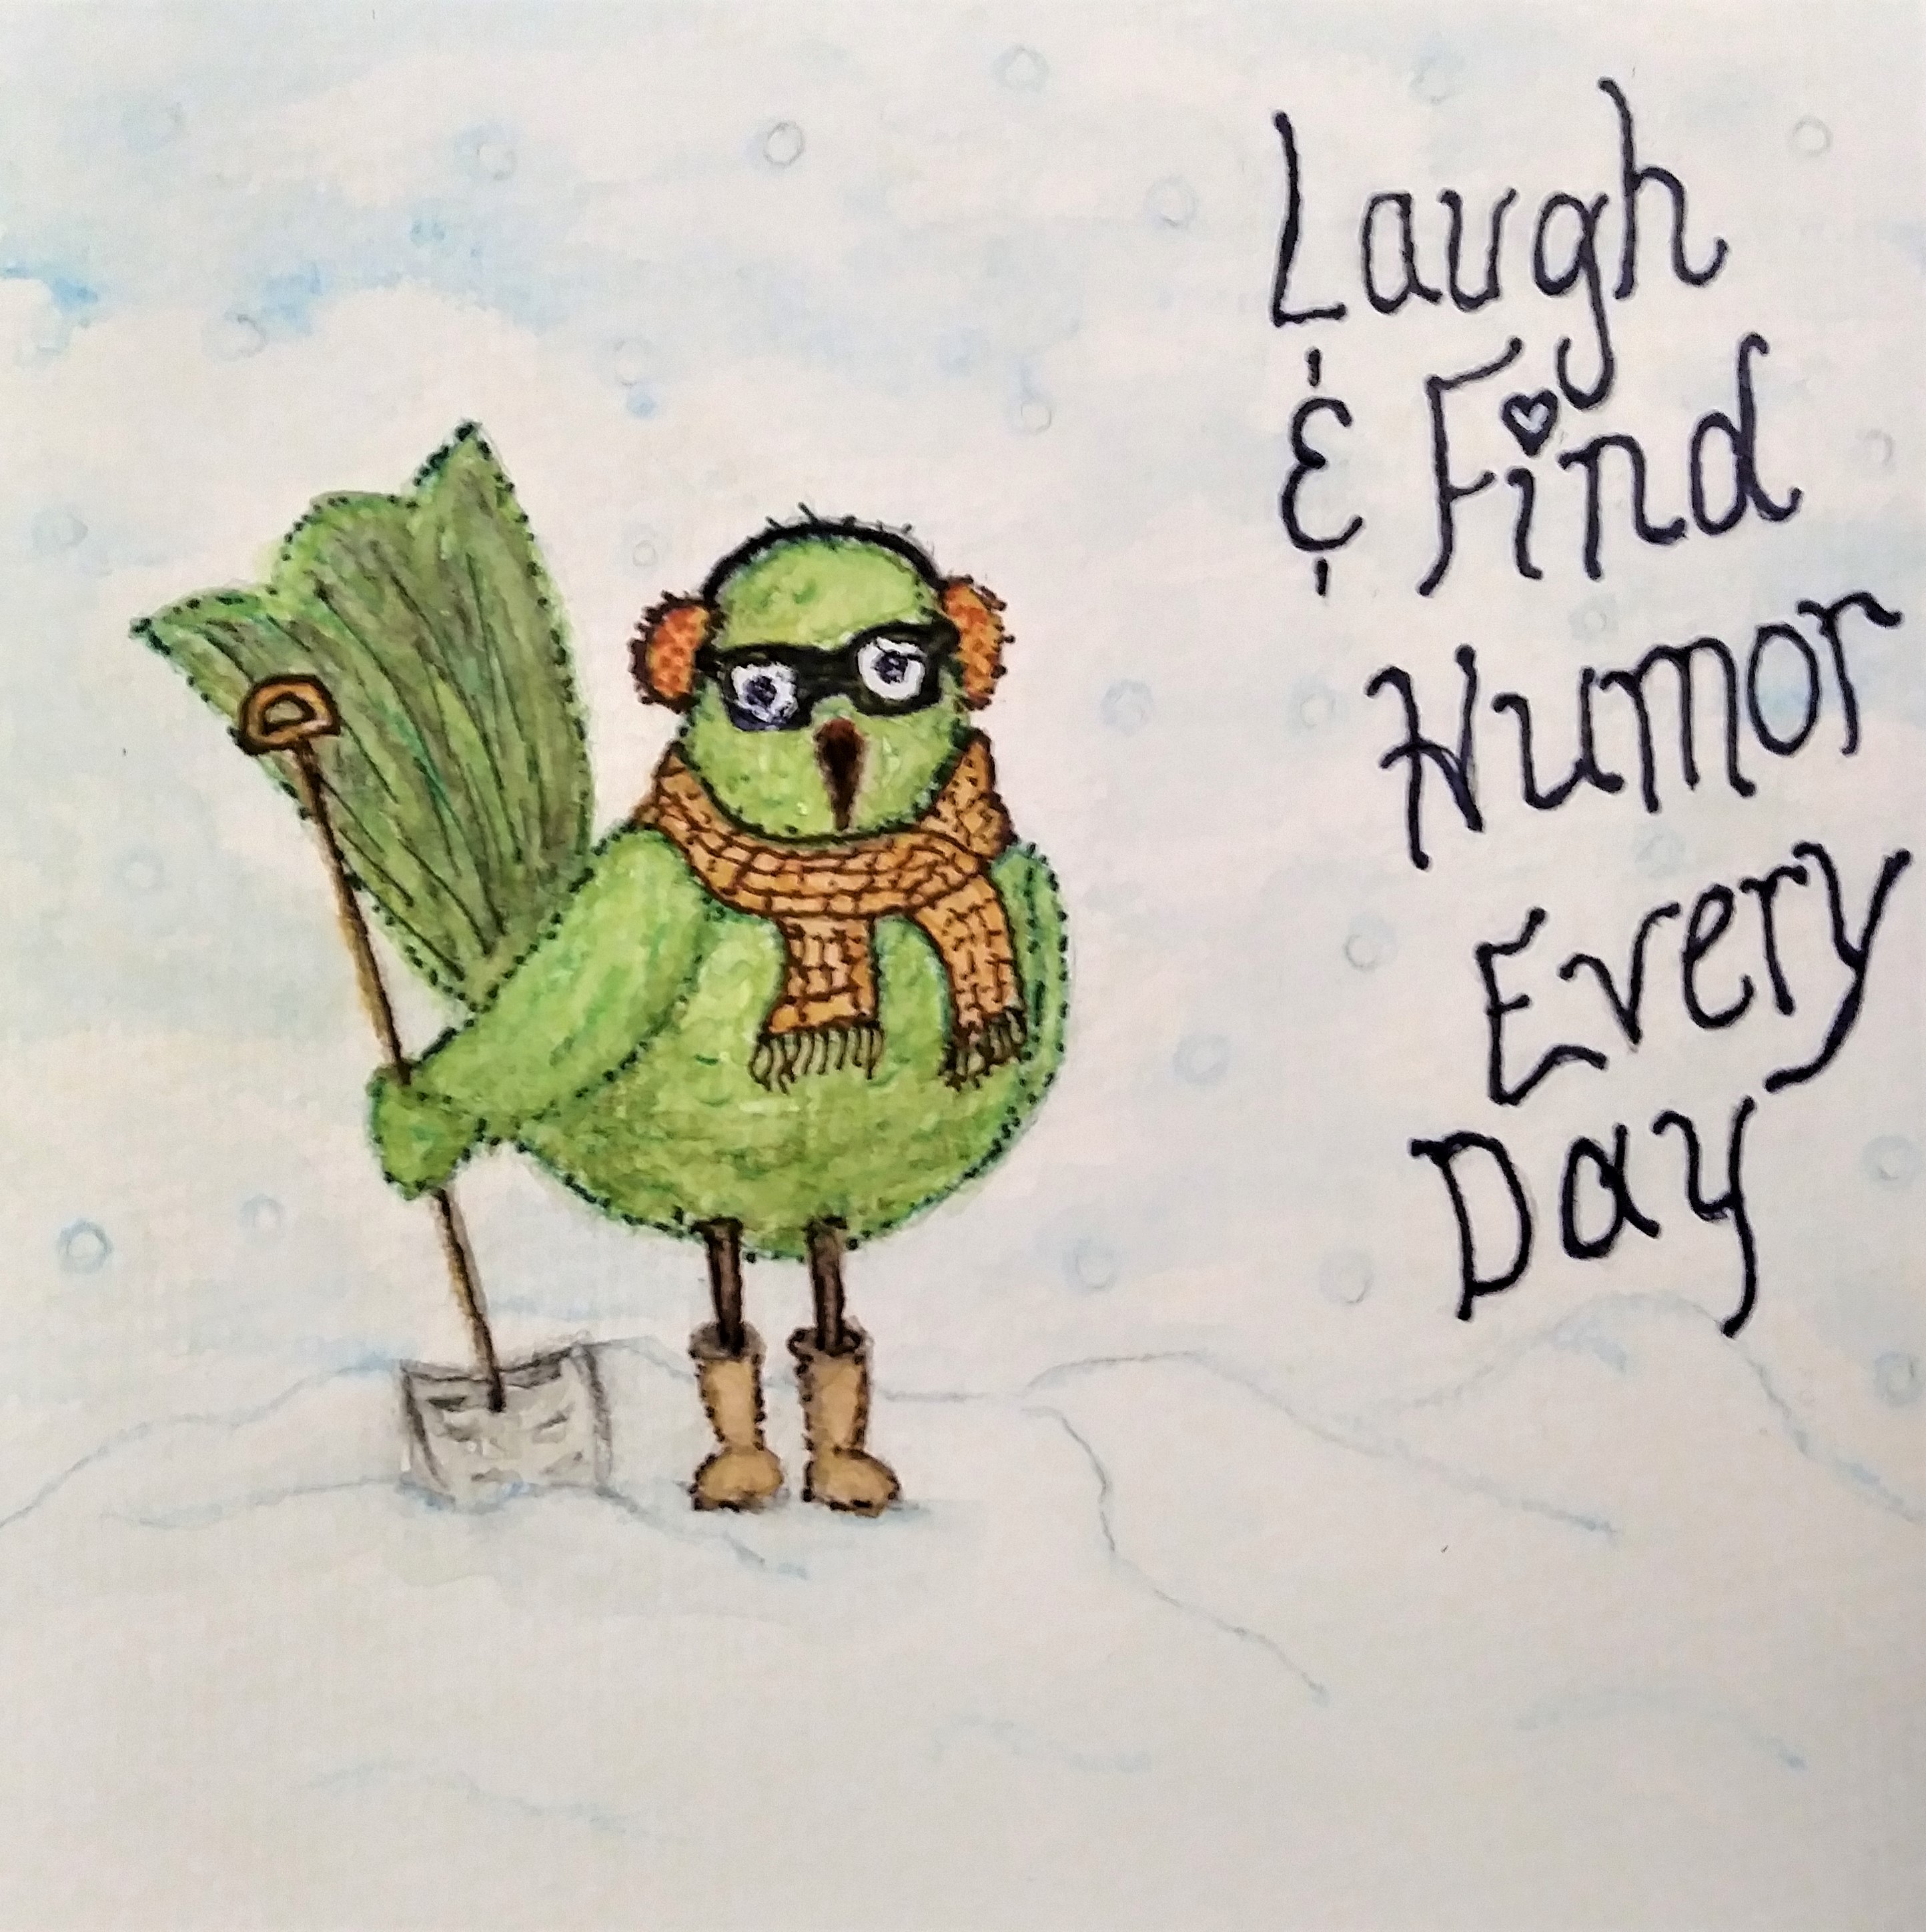 Laugh and find humor every day - watercolor art by herchristianhome.com